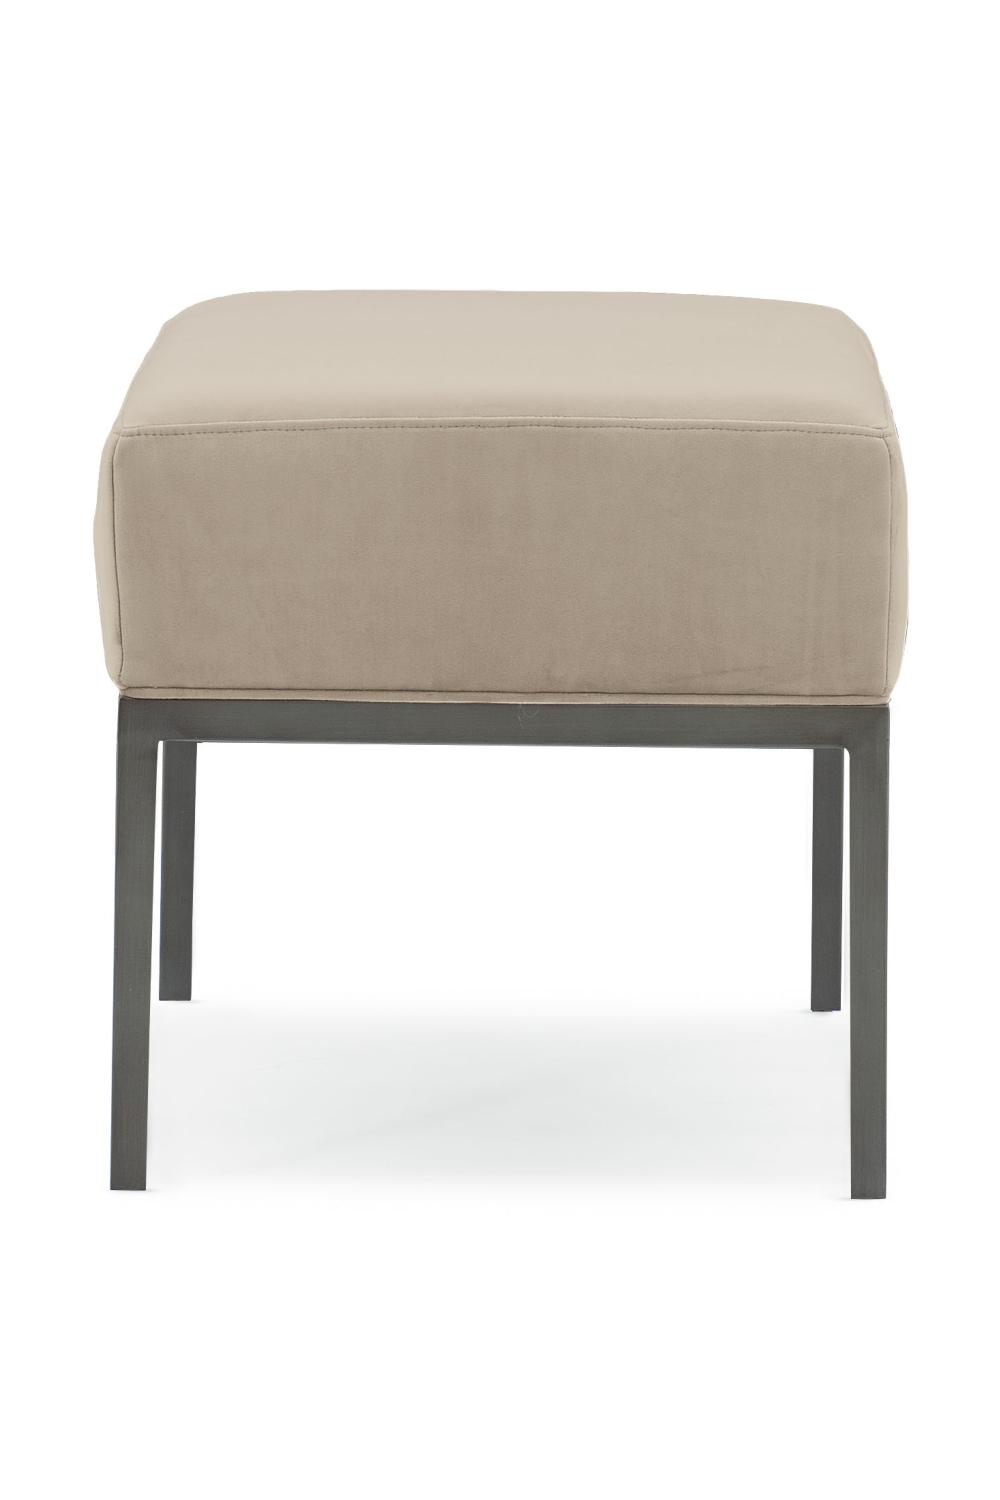 Beige Bed Bench | Caracole Expressions | Oroa.com